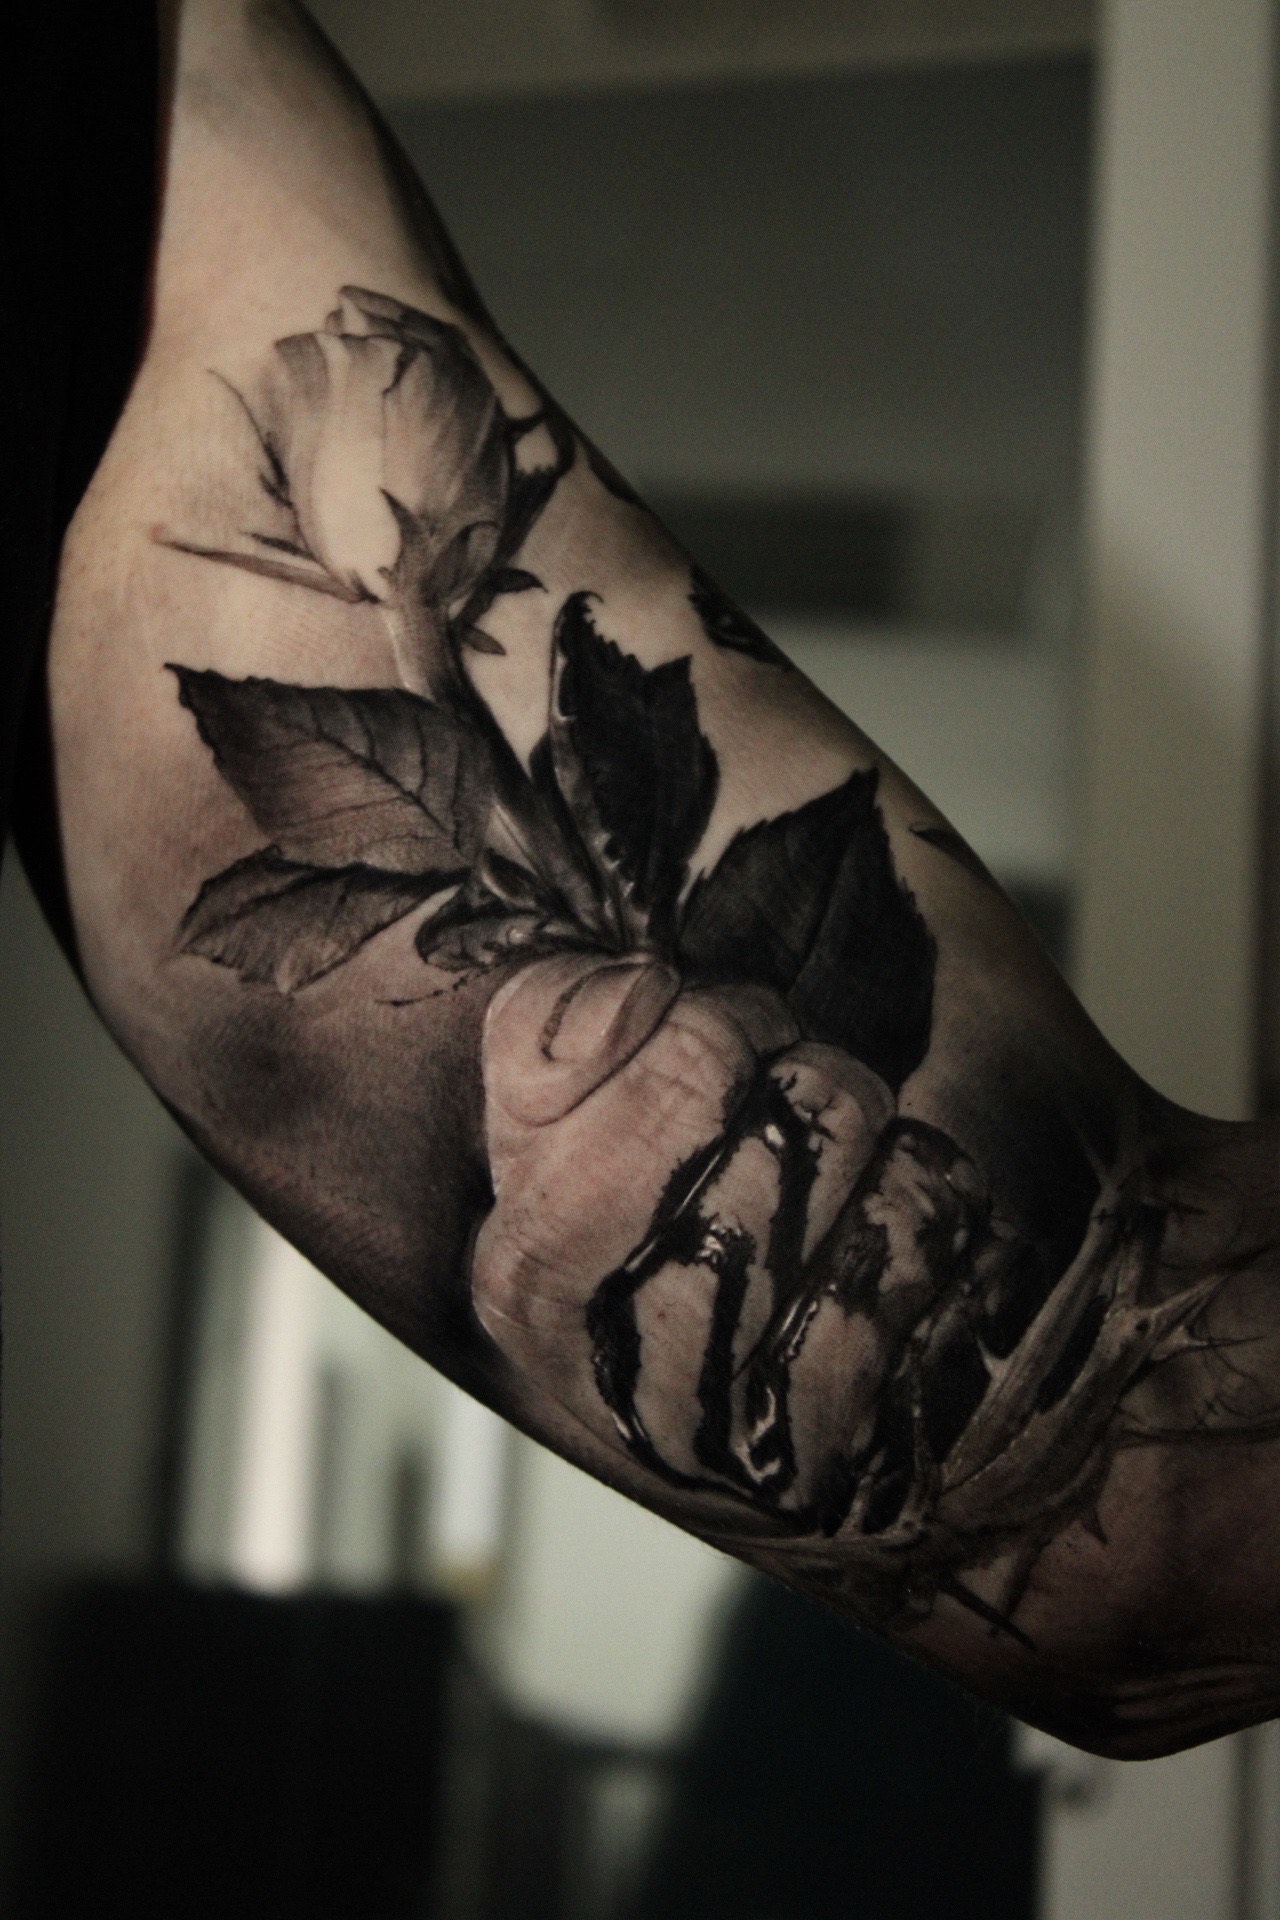 10 Pictures of Black and Gray Tattoos Transformed With Pops of Color